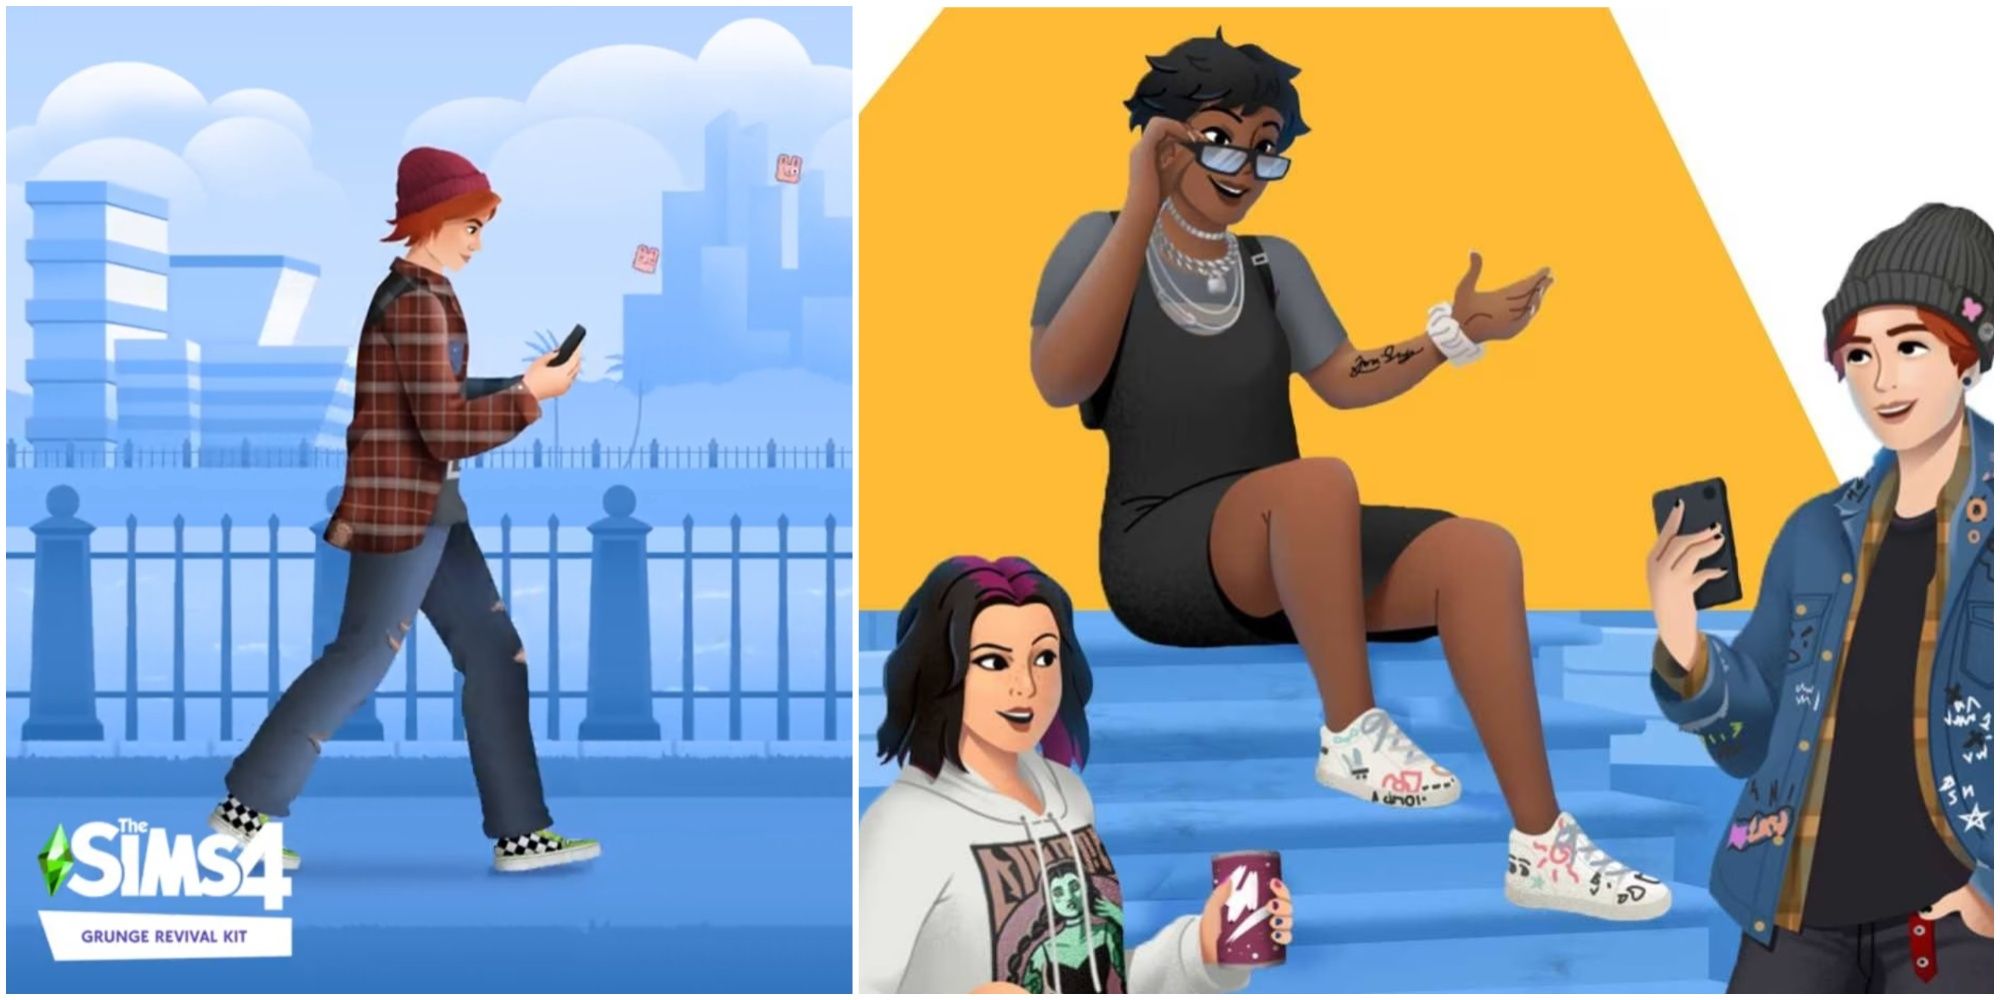 promo images for the grunge revival sims 4 kit